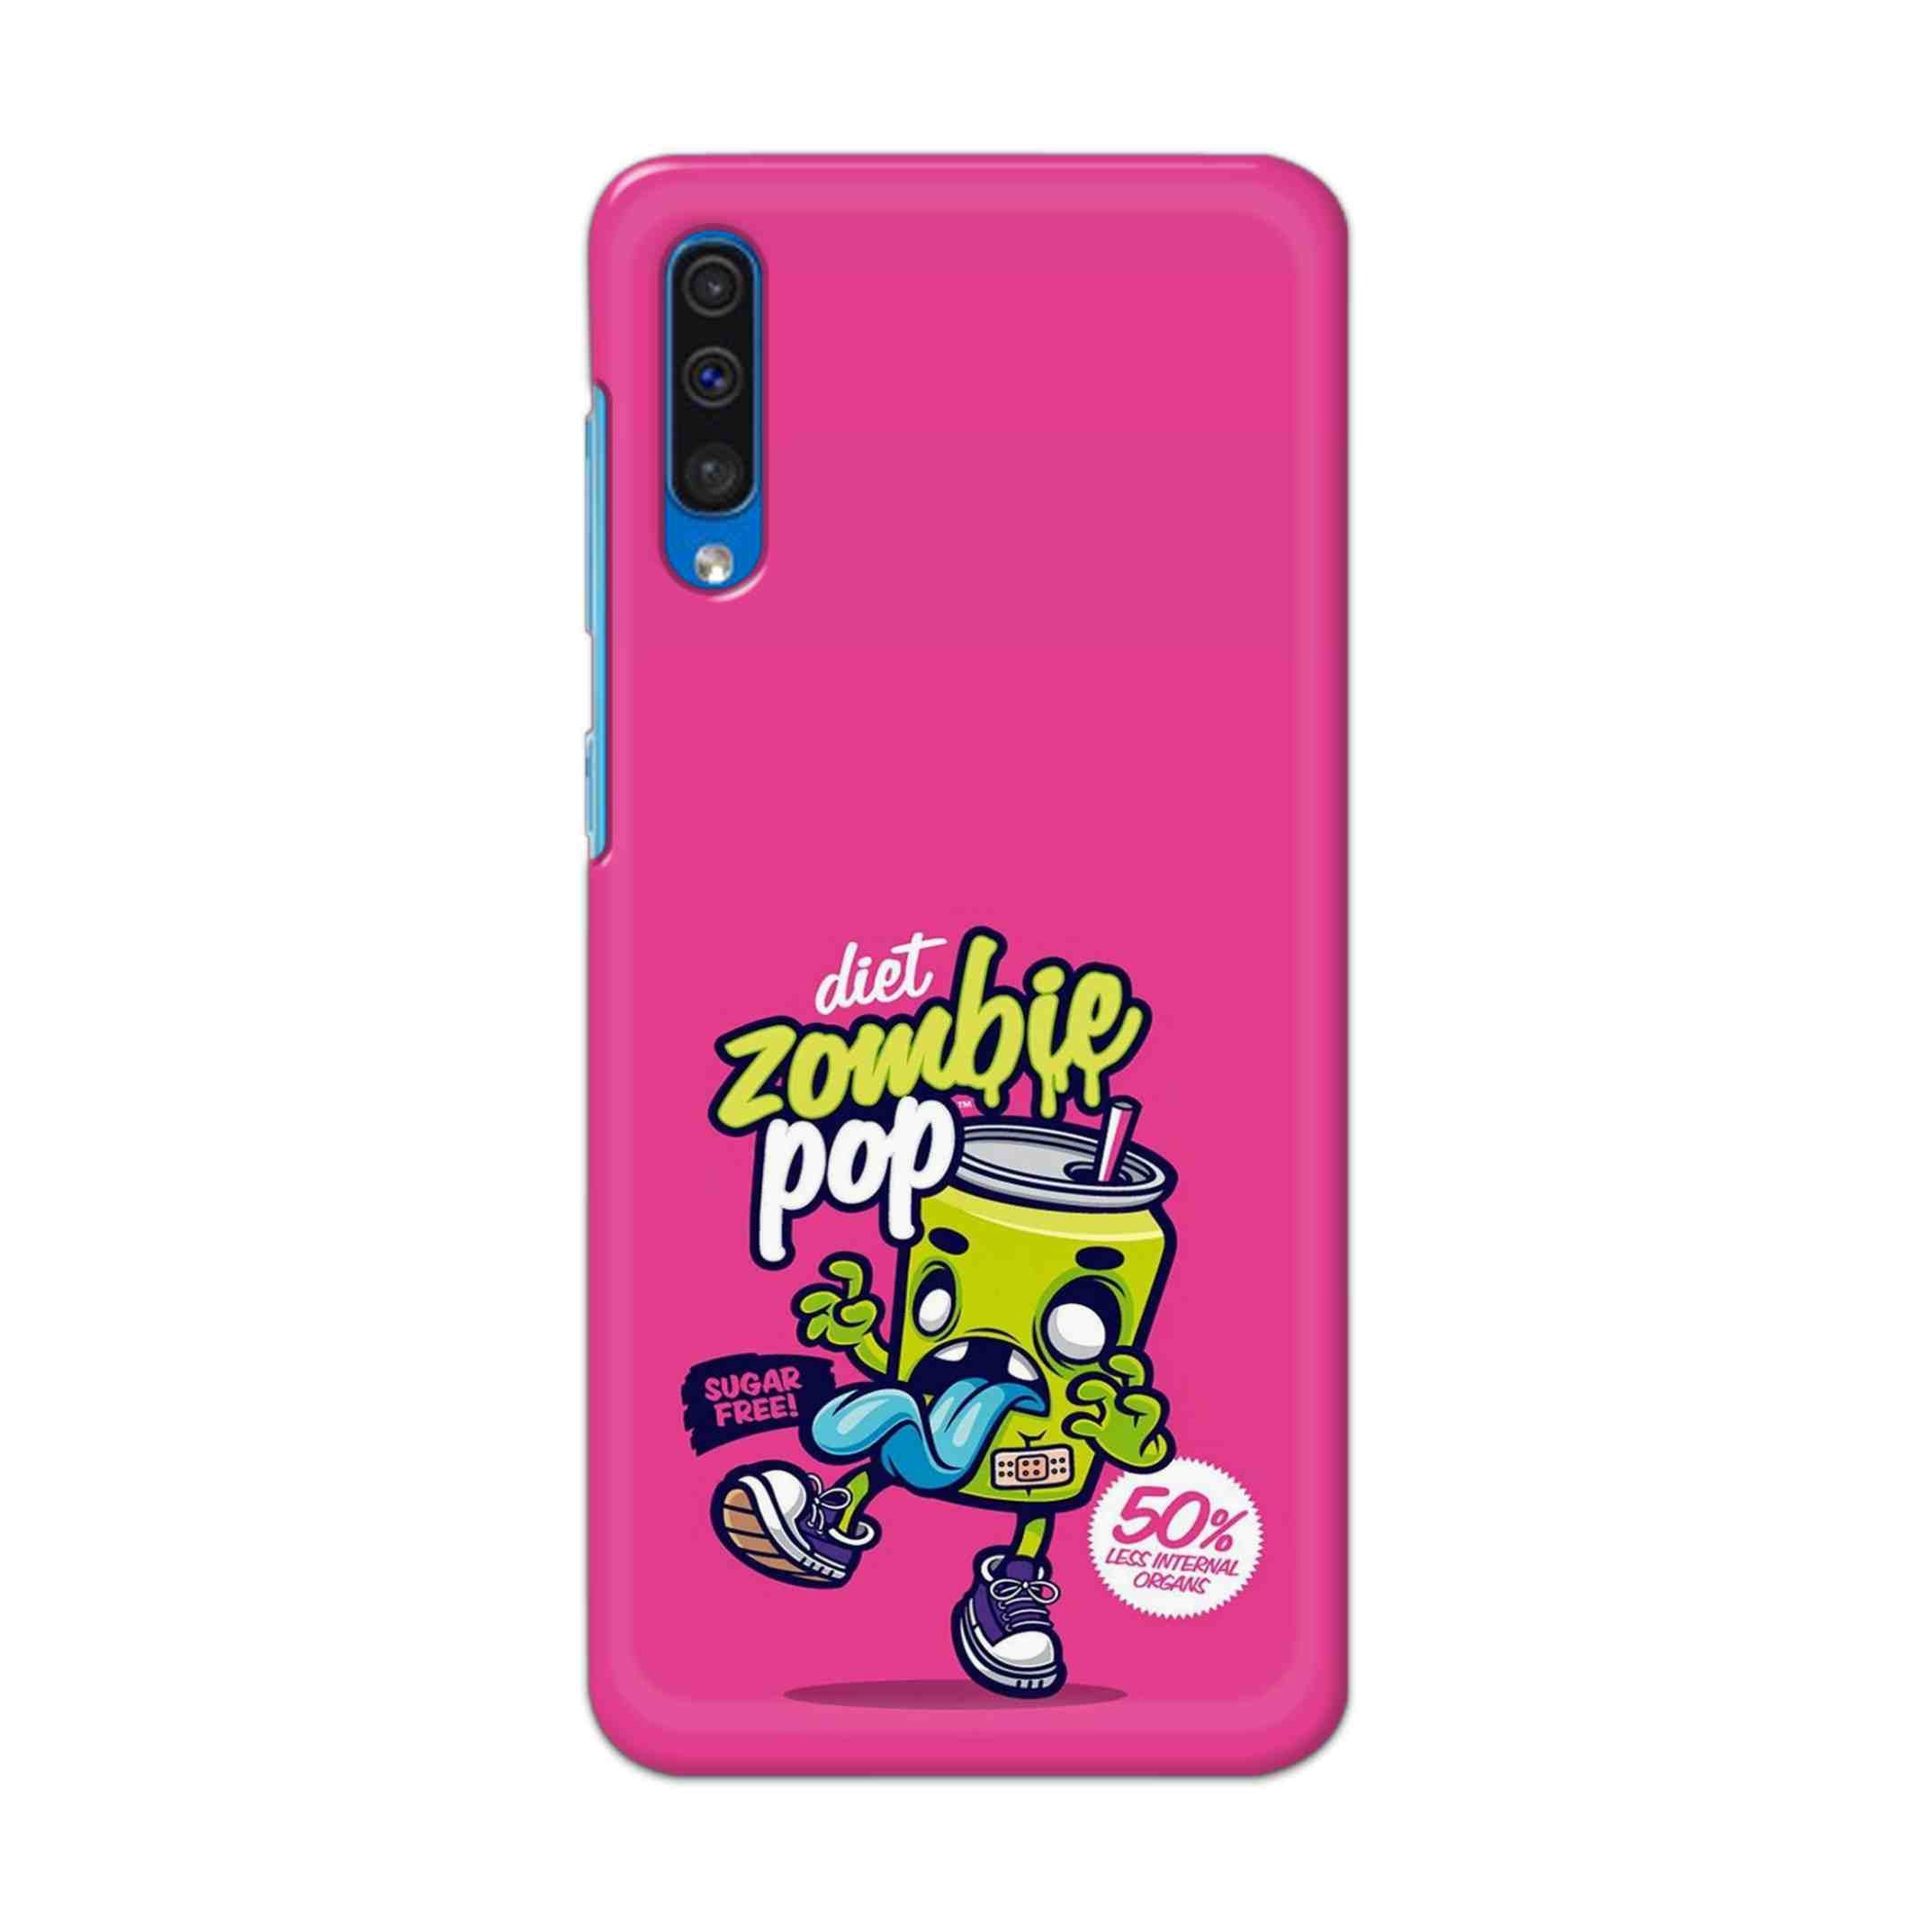 Buy Zombie Pop Hard Back Mobile Phone Case Cover For Samsung Galaxy A50 / A50s / A30s Online